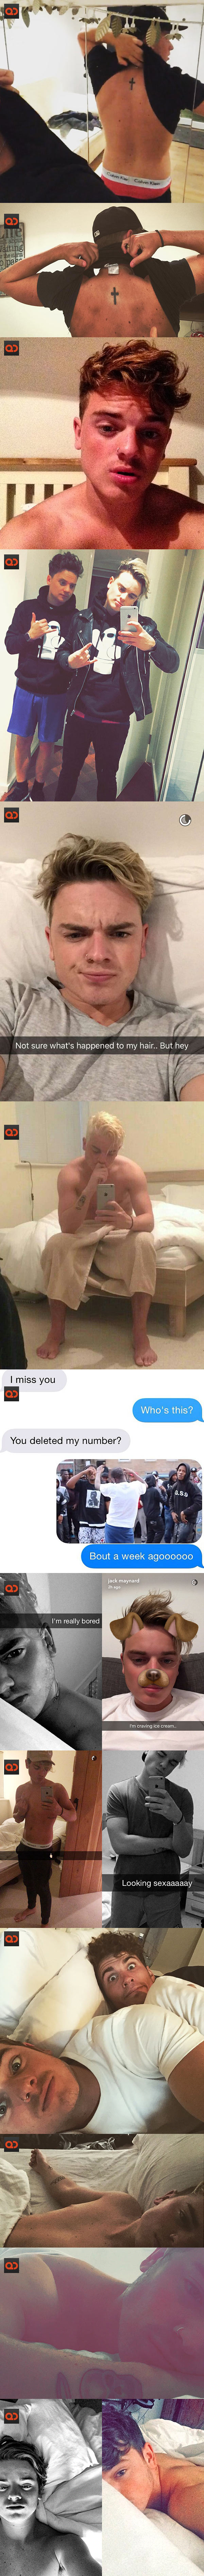 Jack Maynard, From British Reality Show “I'm A Celebrity… Get Me Out Of Here!”, Uncut Cock Exposed In Leaked Selfie!